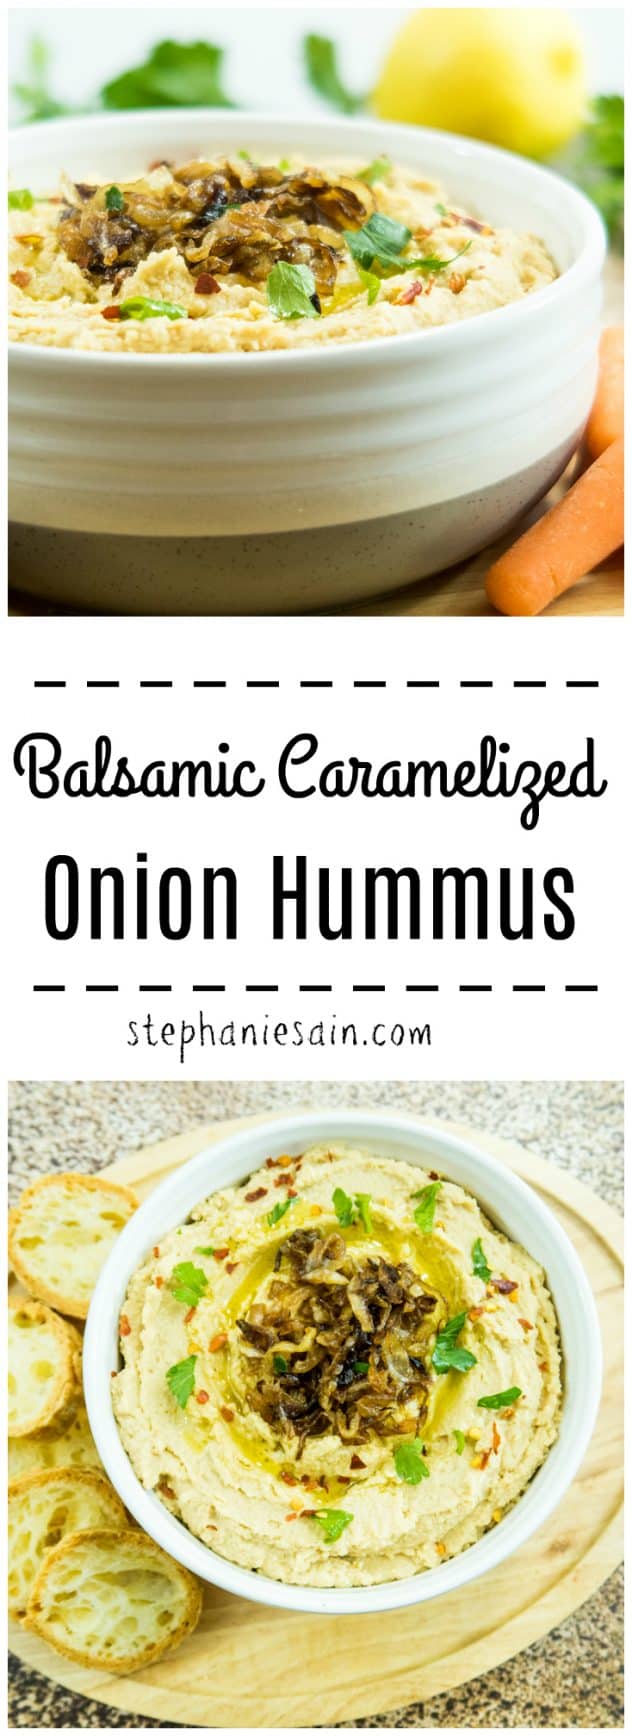 Balsamic Caramelized Onion Hummus is sweet, savory, and velvety smooth. Hummus & caramelized onions blended together for the perfect flavor combination. Perfect for appetizer, snacks or anytime. Gluten free & Vegan option.